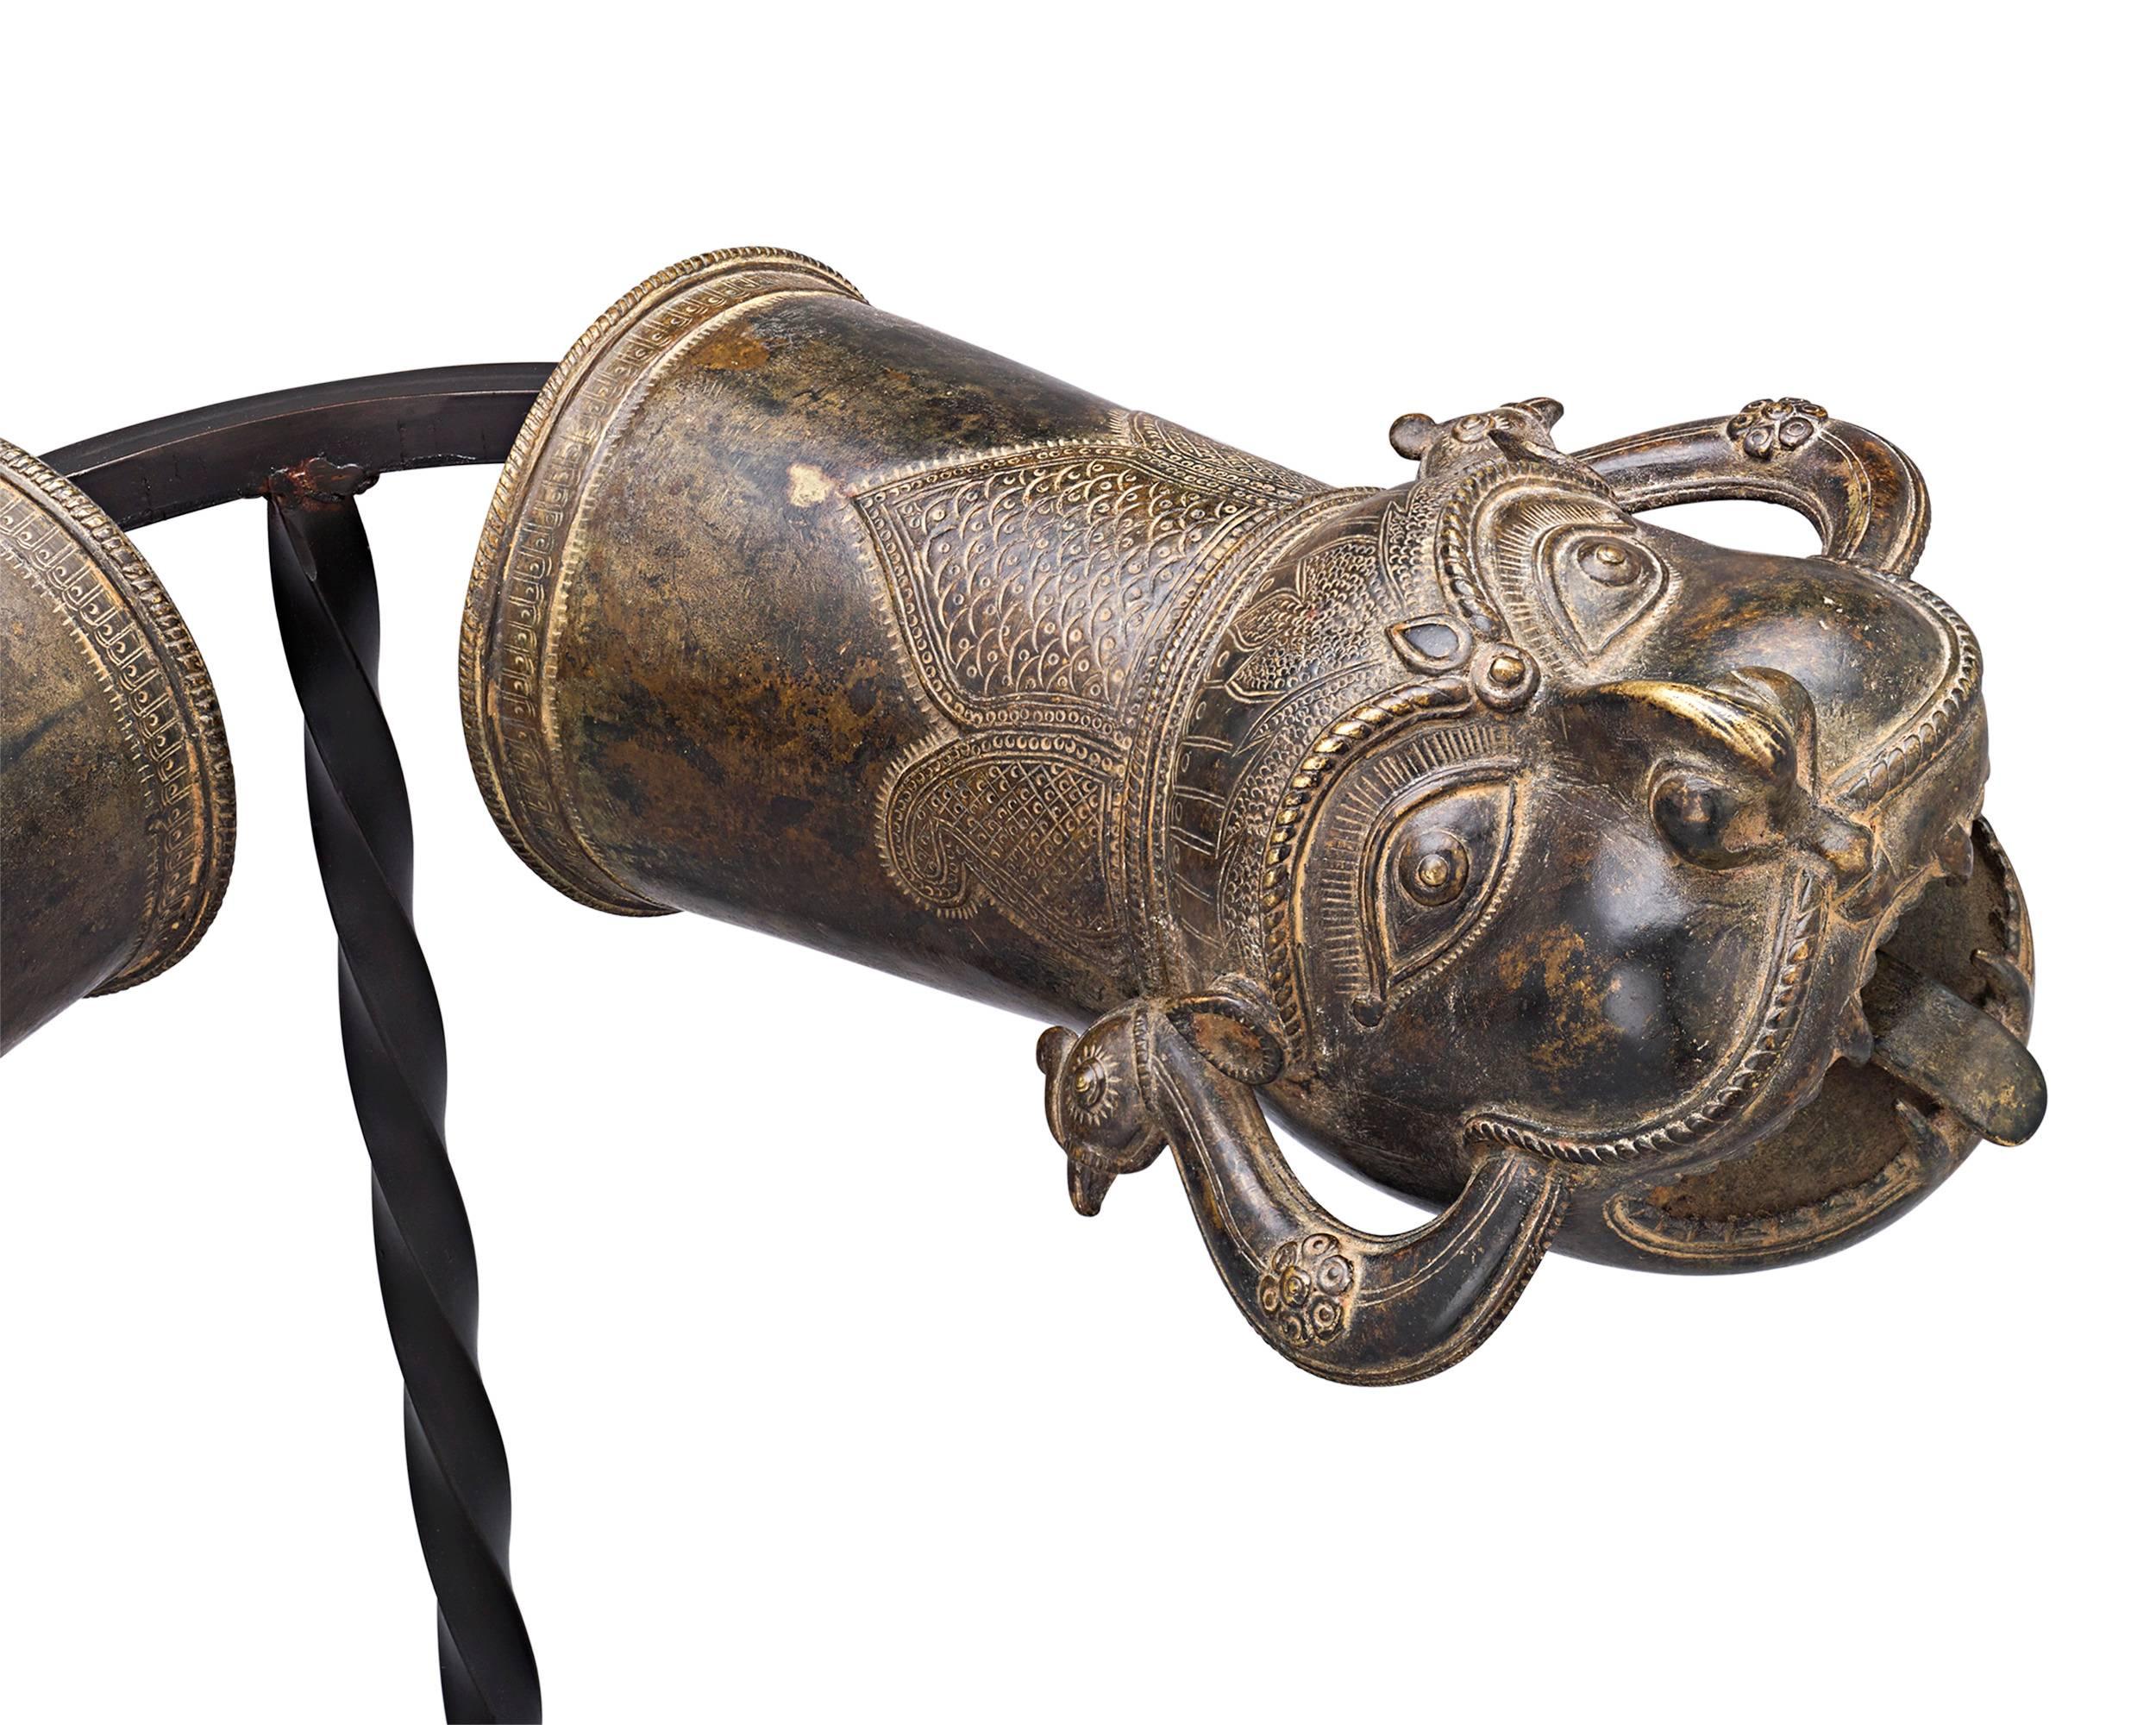 Beautifully stylized and crafted in the form of protective mythological creatures are these exceptional 18th-century Indian bronze palanquin finials. Palanquin, or “palki”, are litter-type conveyances that have been in use in India for centuries.